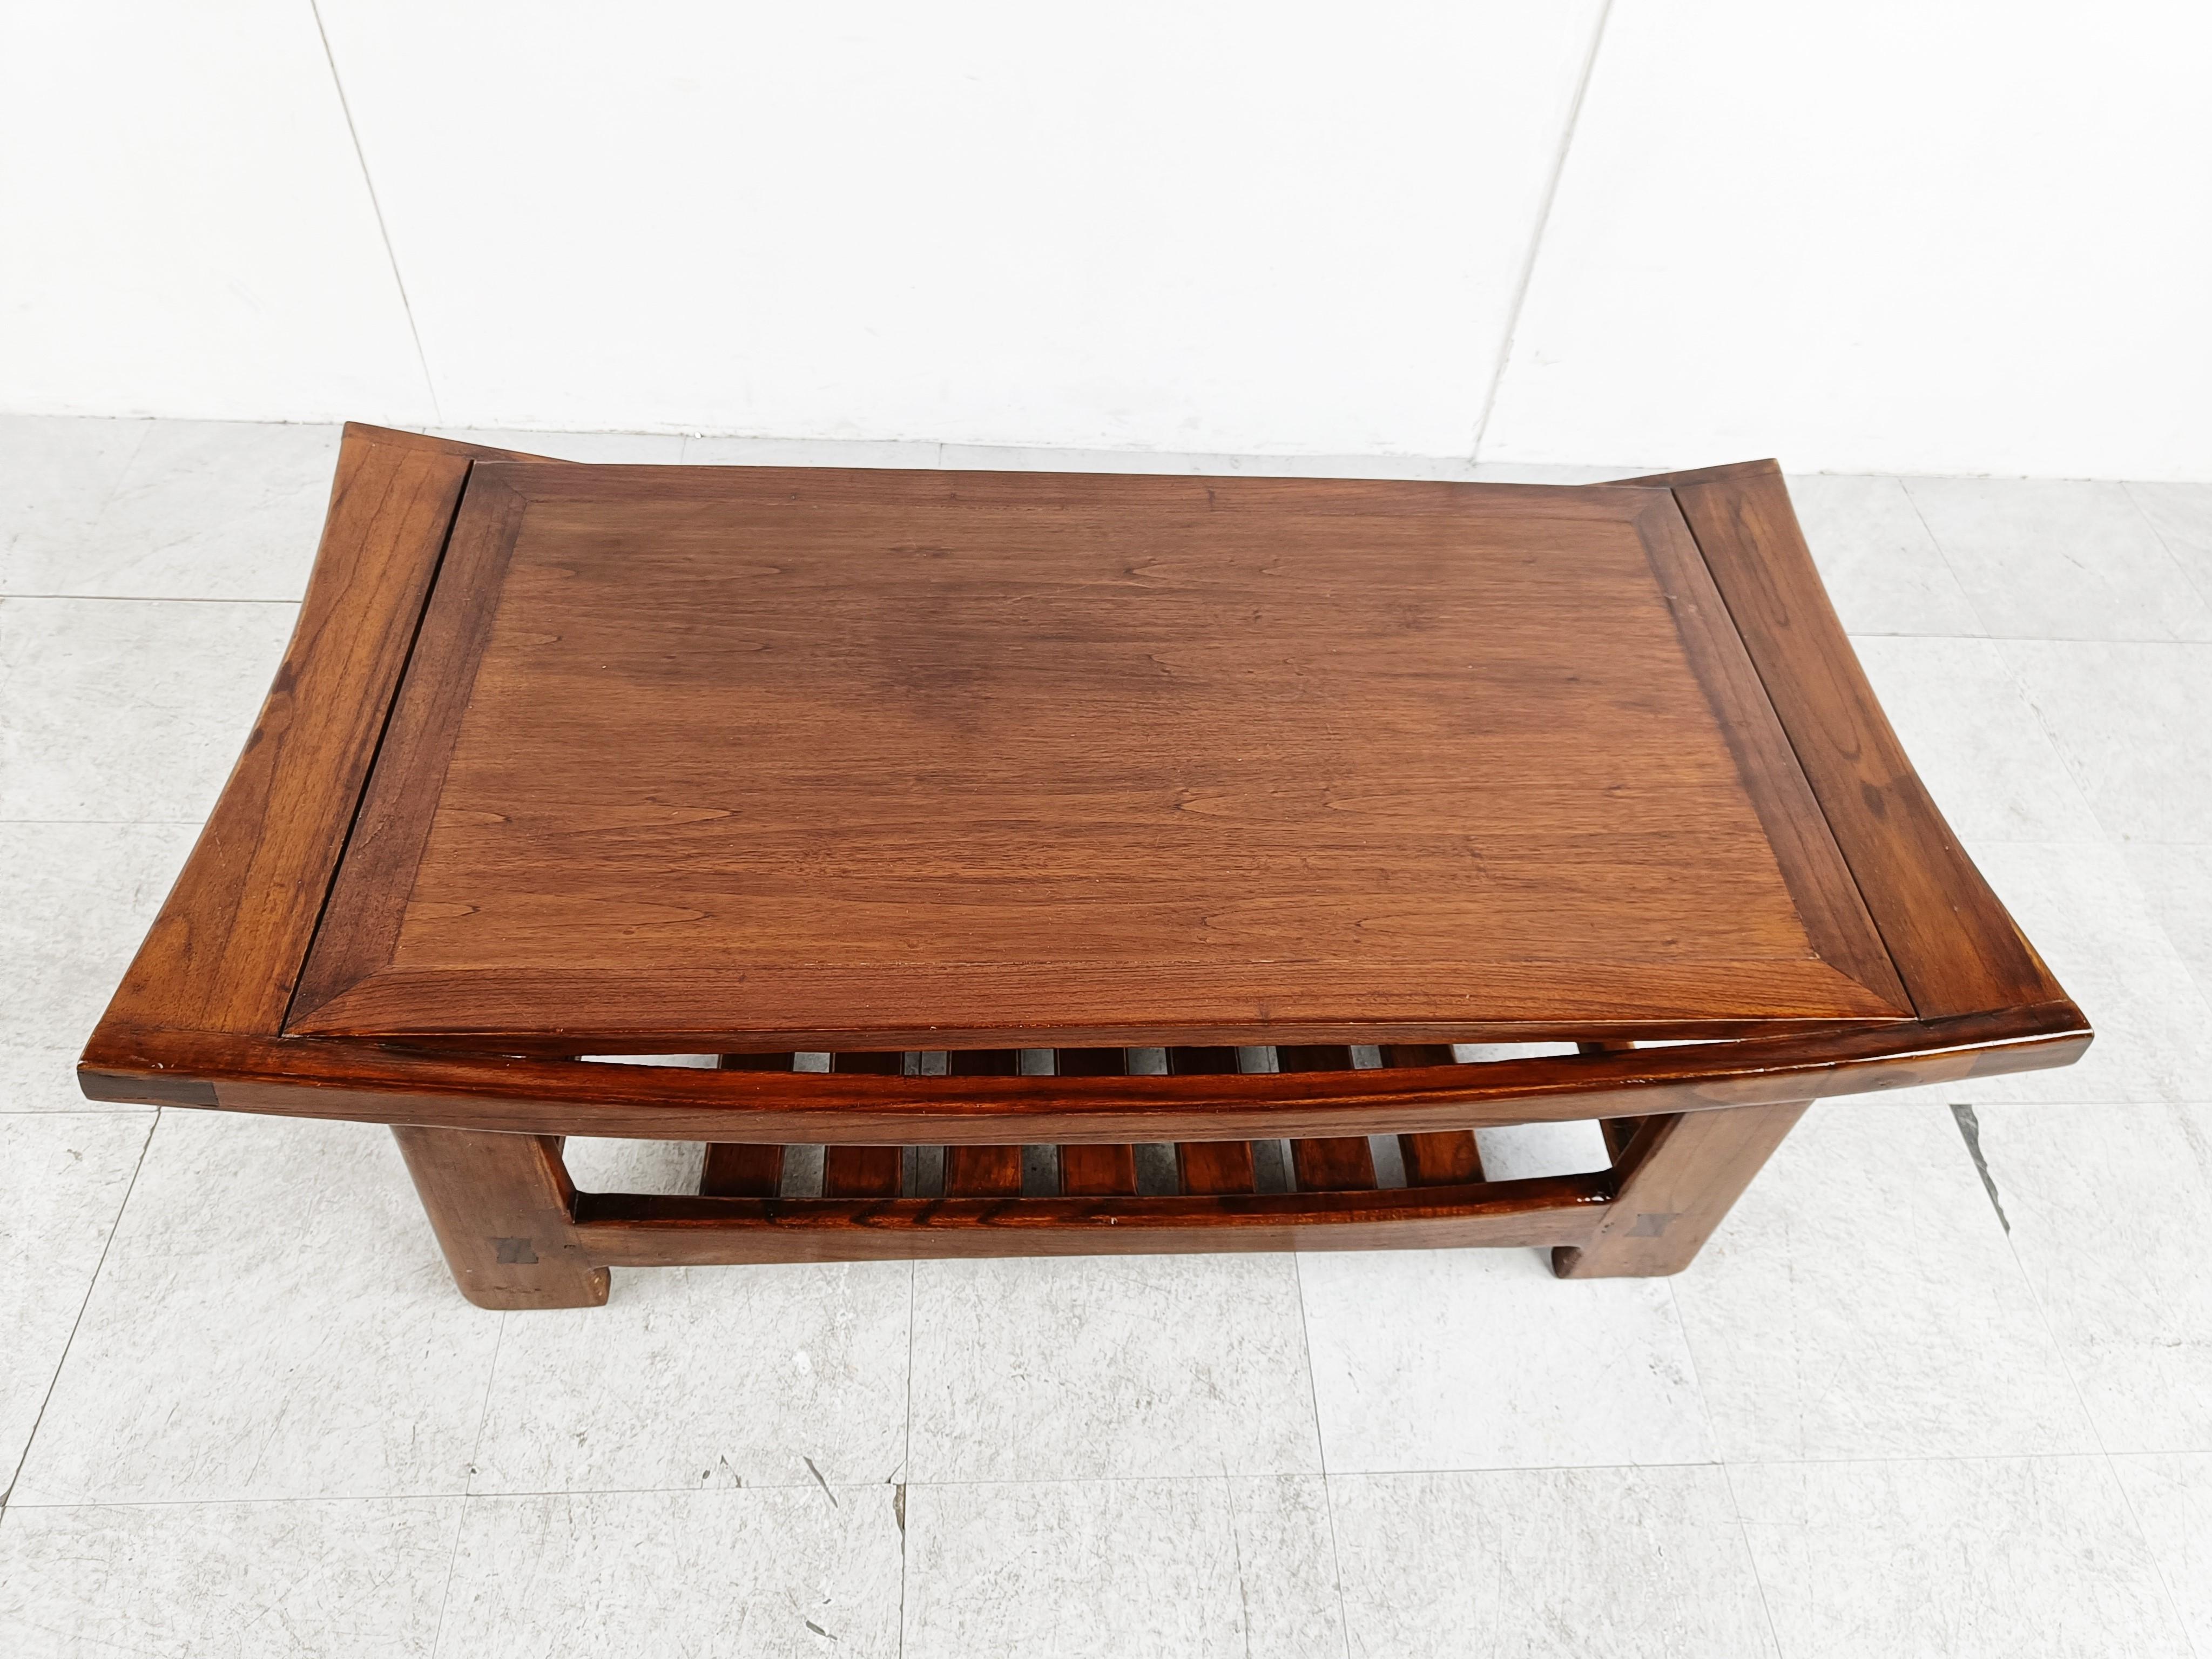 Beautiful organic shaped oriental style coffee table from the 1970s.

It has a lower shelve to store magazines etc

Very good condition

1970s - Asia

Dimensions:
Height: 40cm/15.74